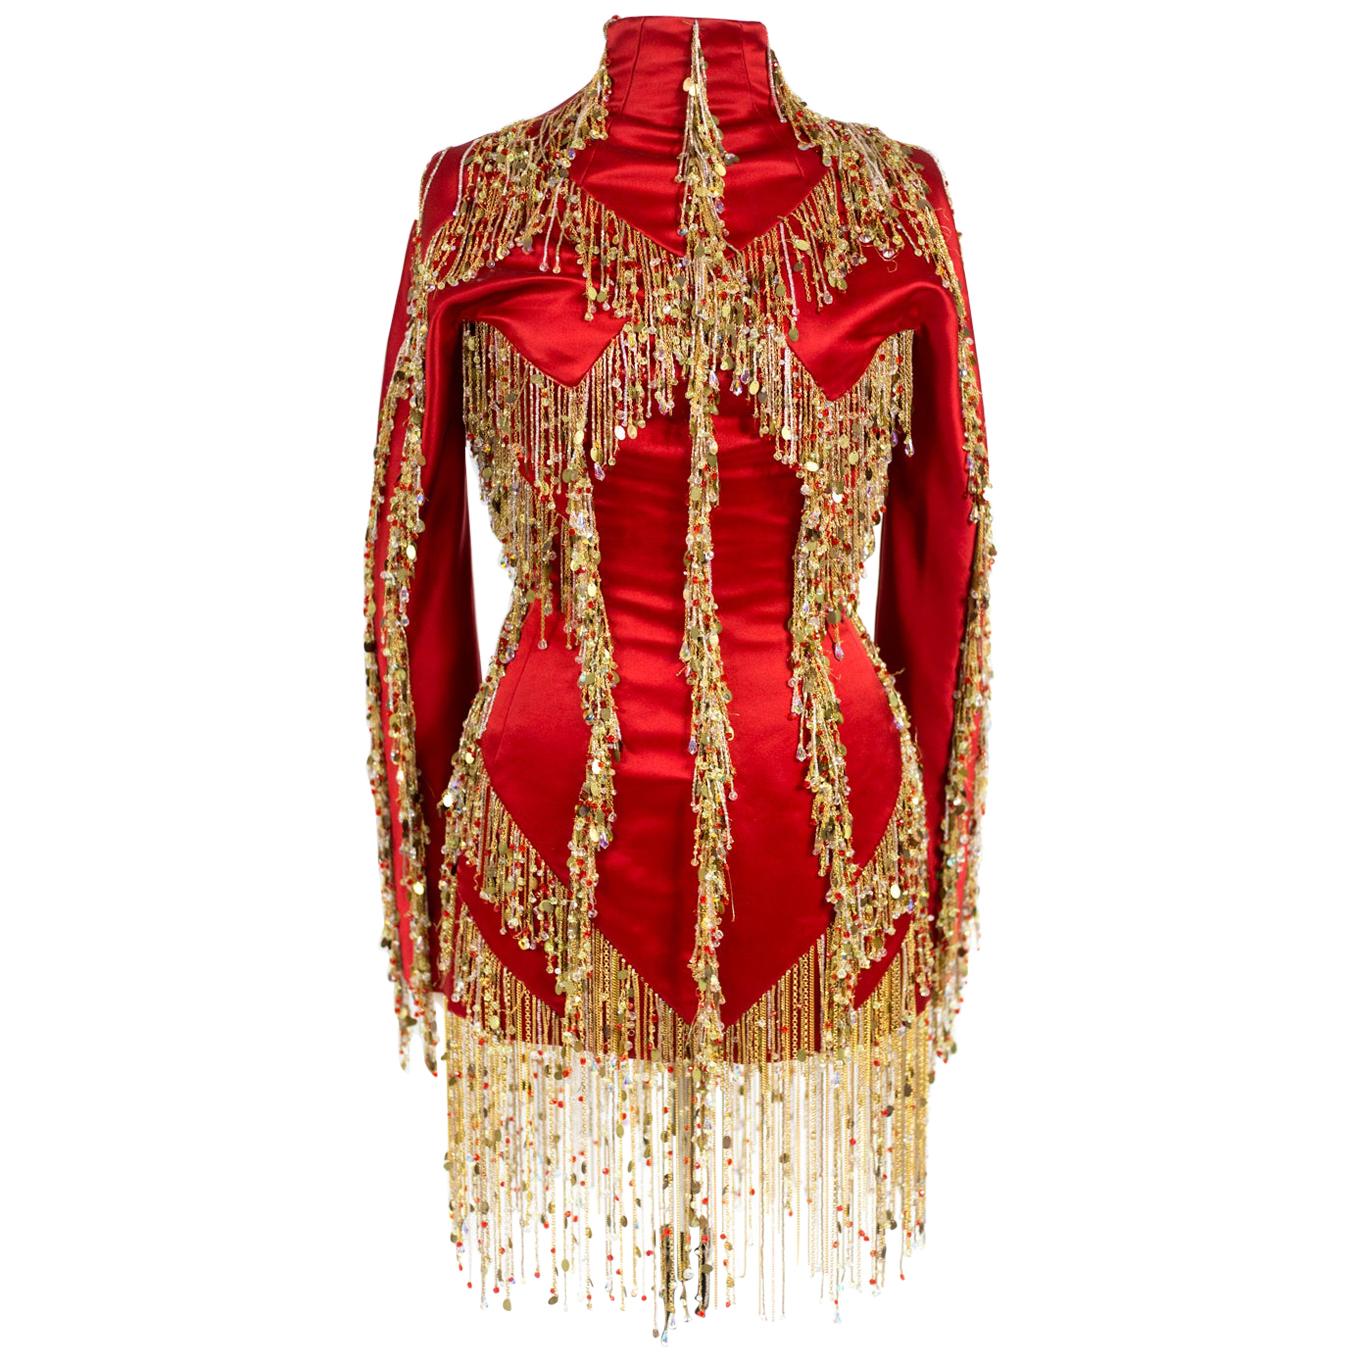 A Givenchy Haute Couture Tunic Dress By Julien MacDonald - Fall-Winter 2002